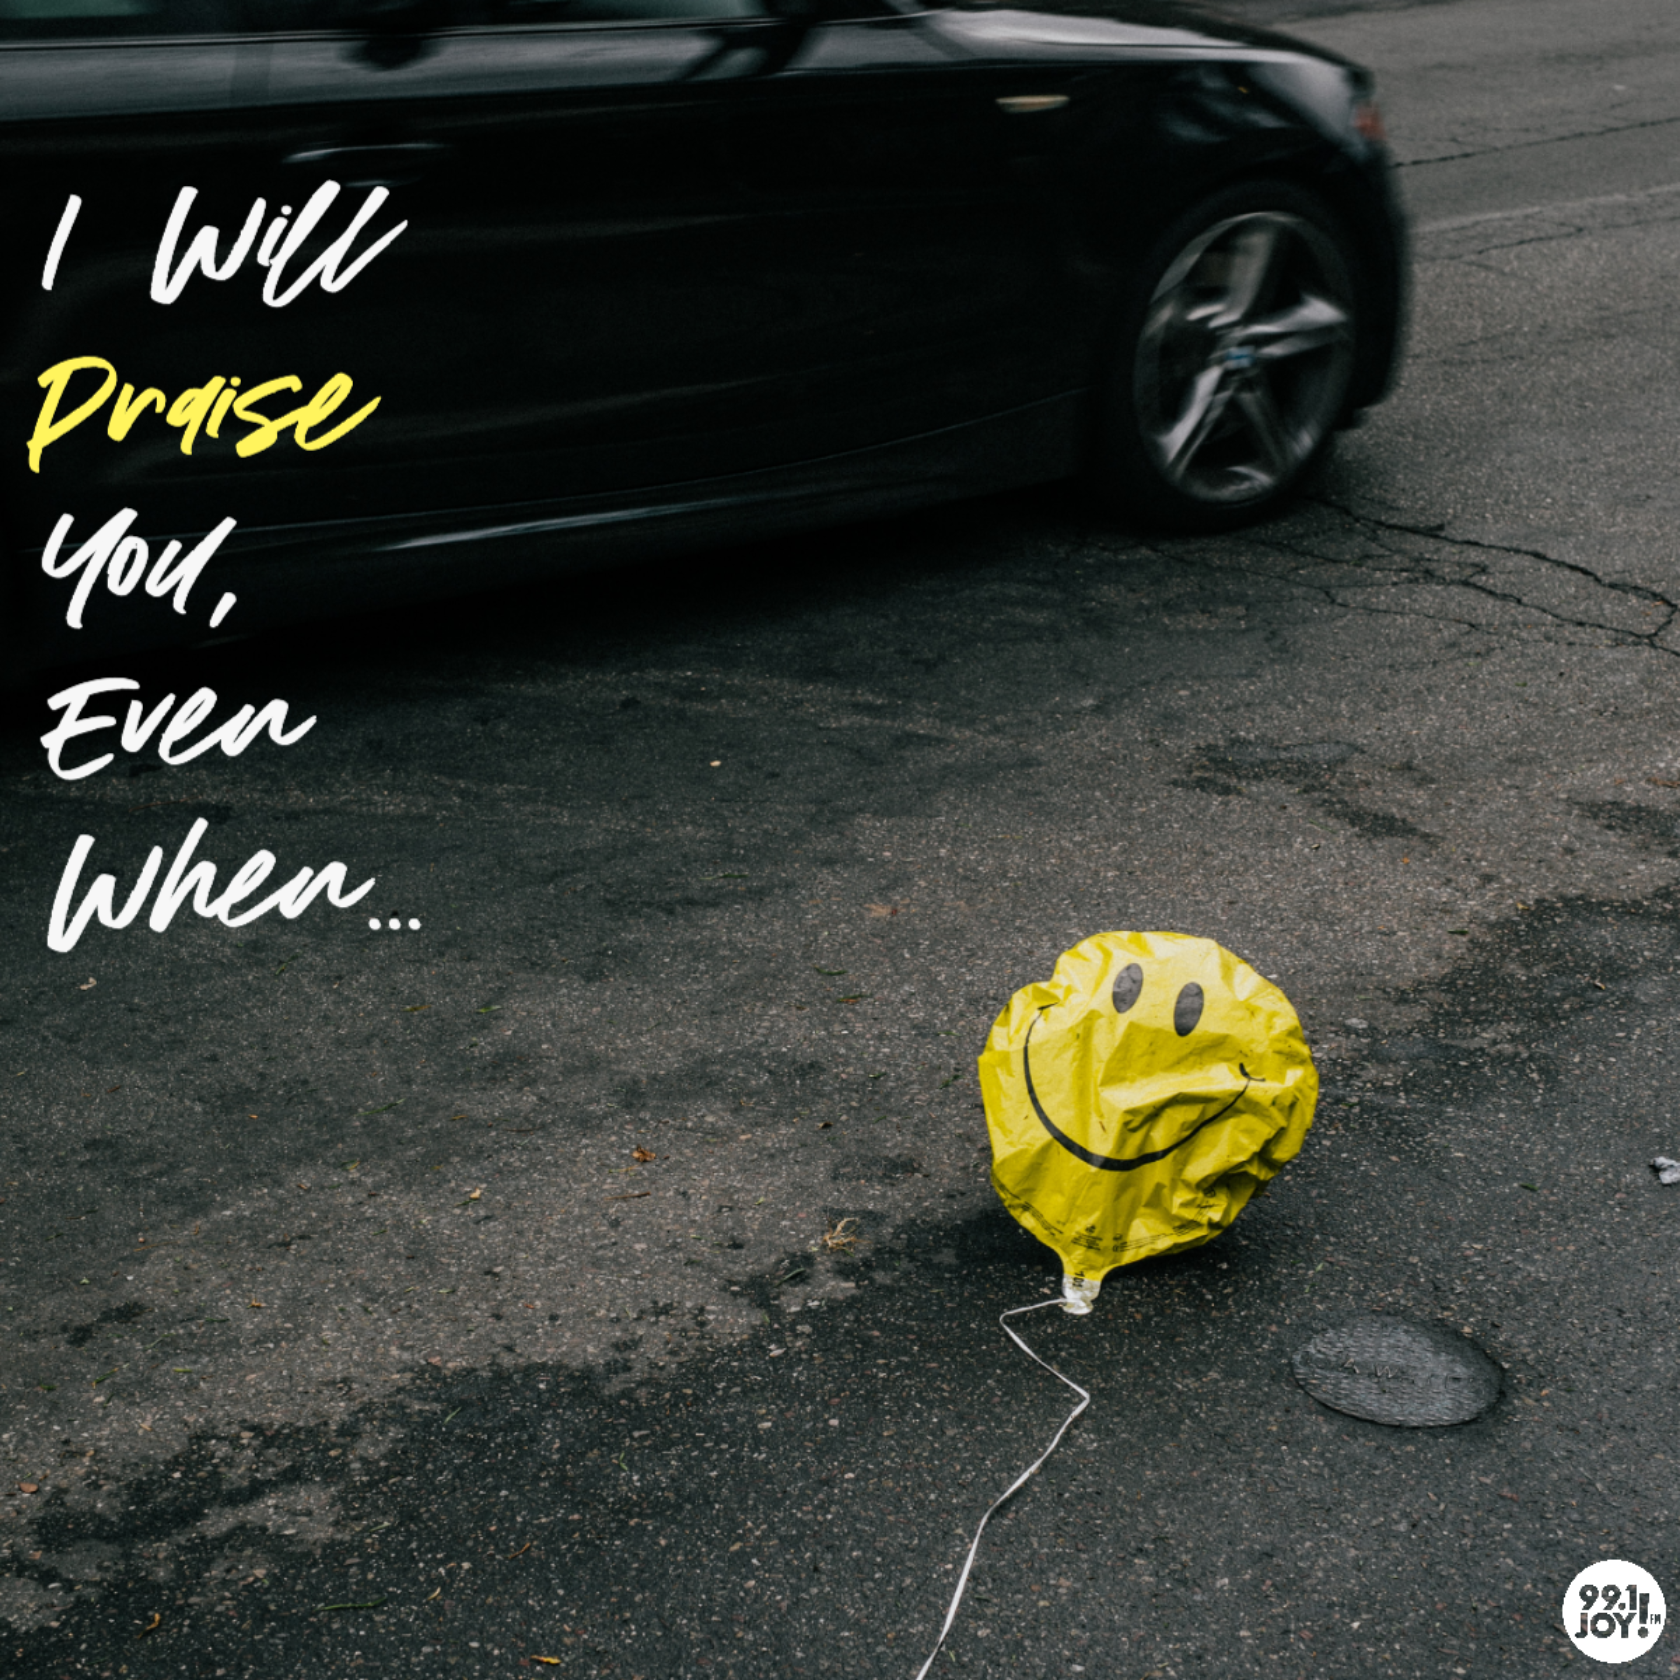 I Will Praise You, Even When...